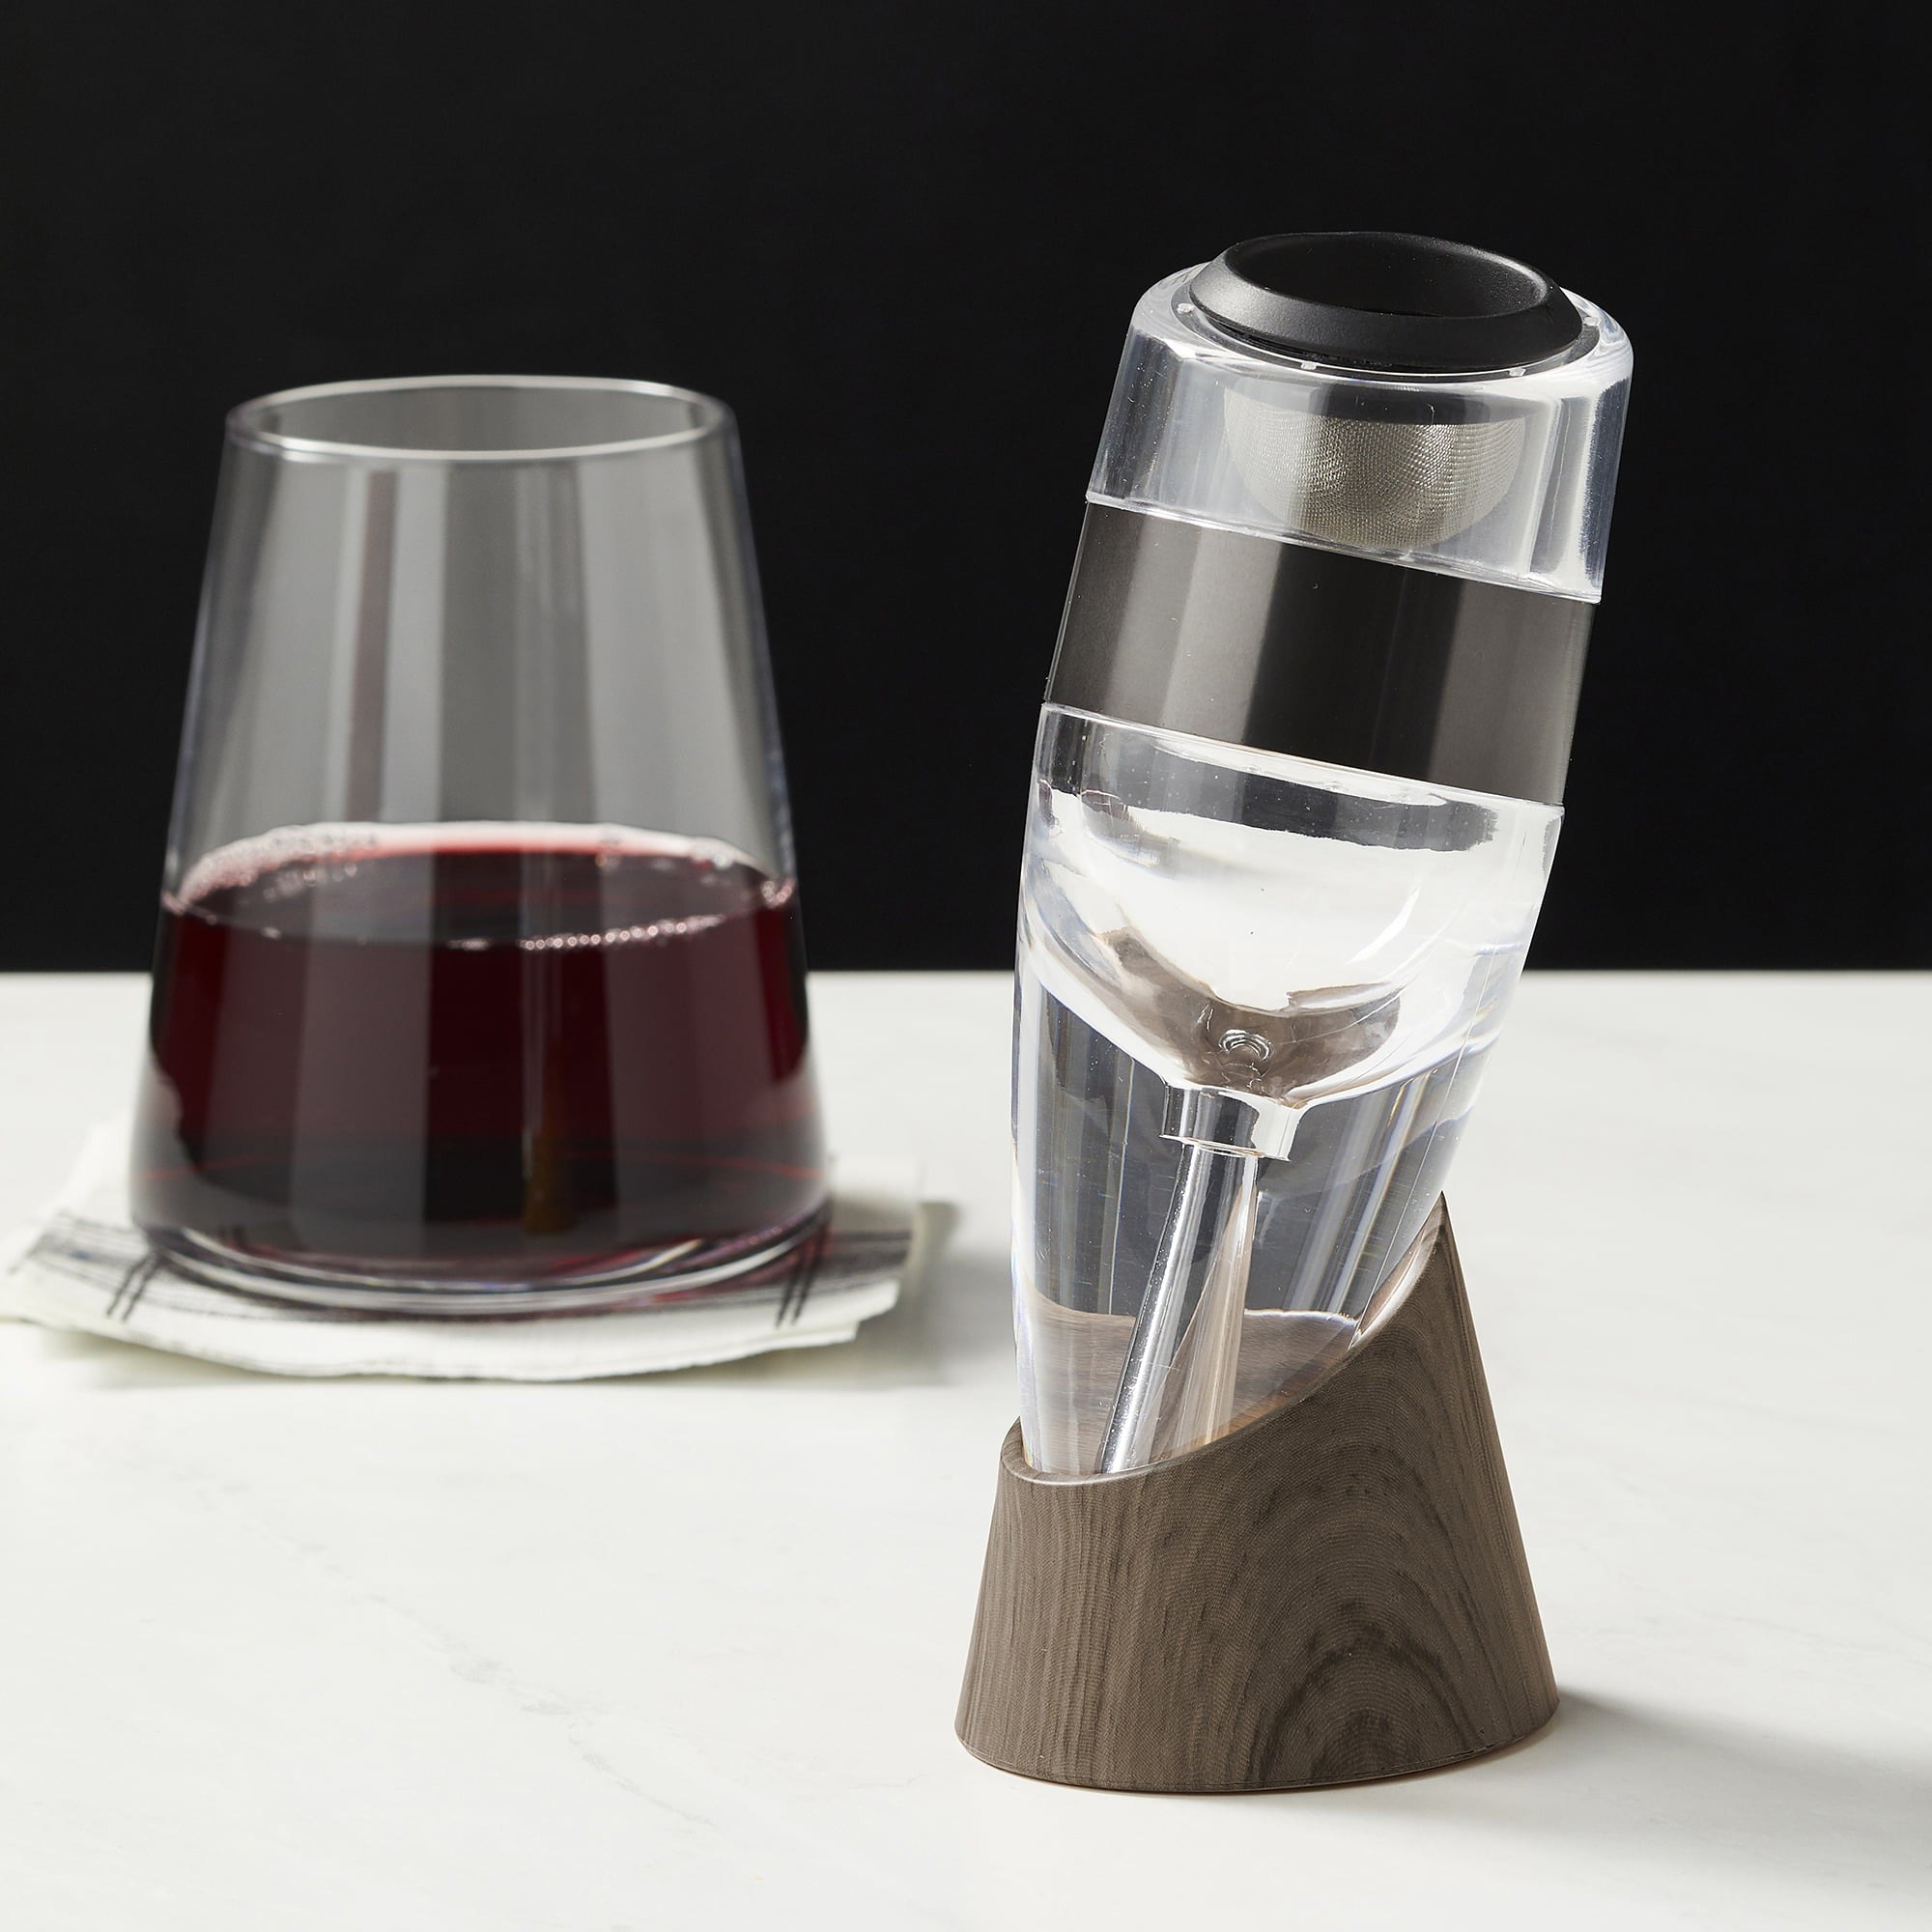 Wine aerator with glass of red wine in the back